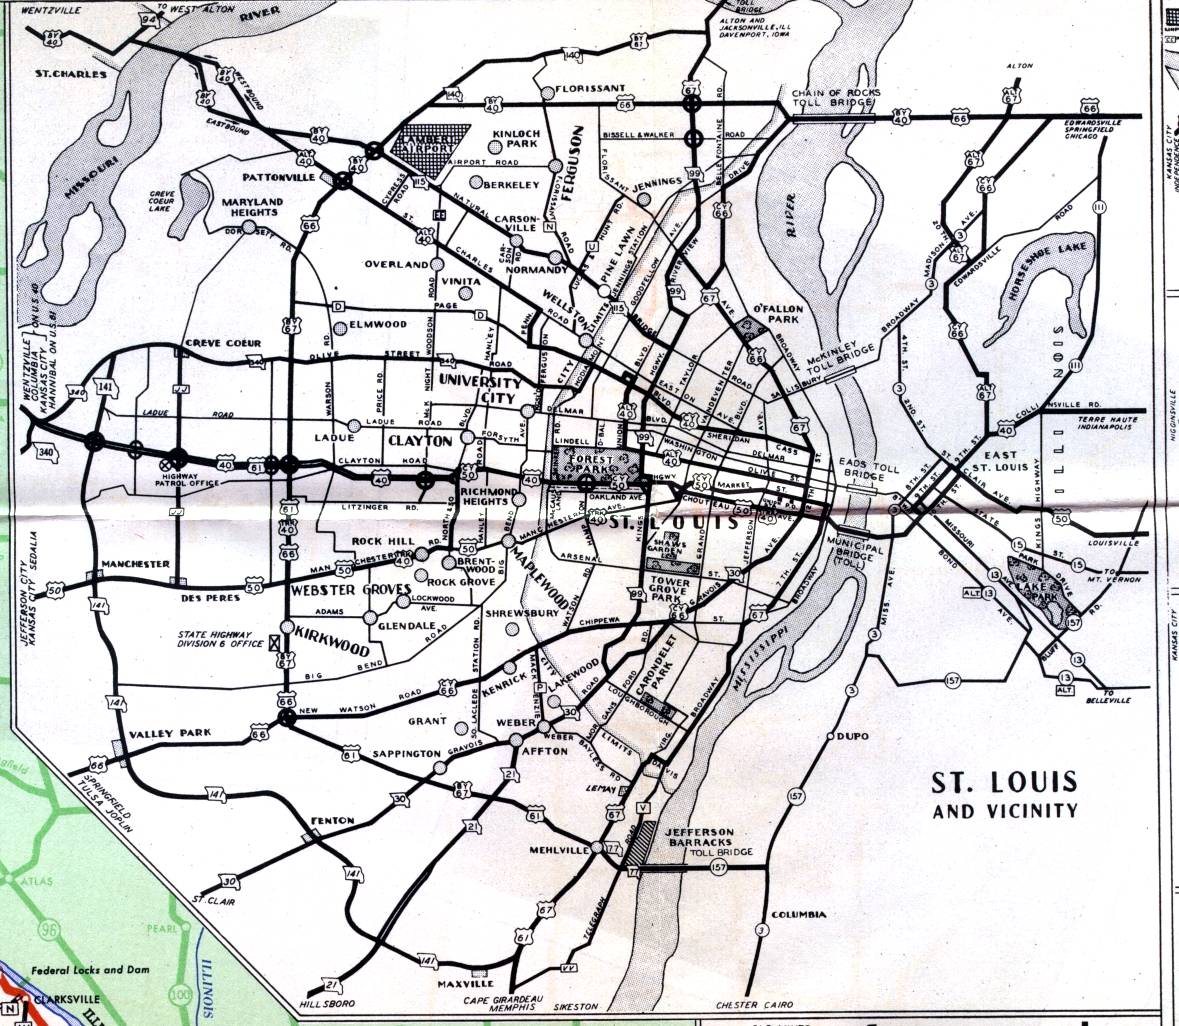 Inset map of St. Louis, Mo. and vicinity (1950)